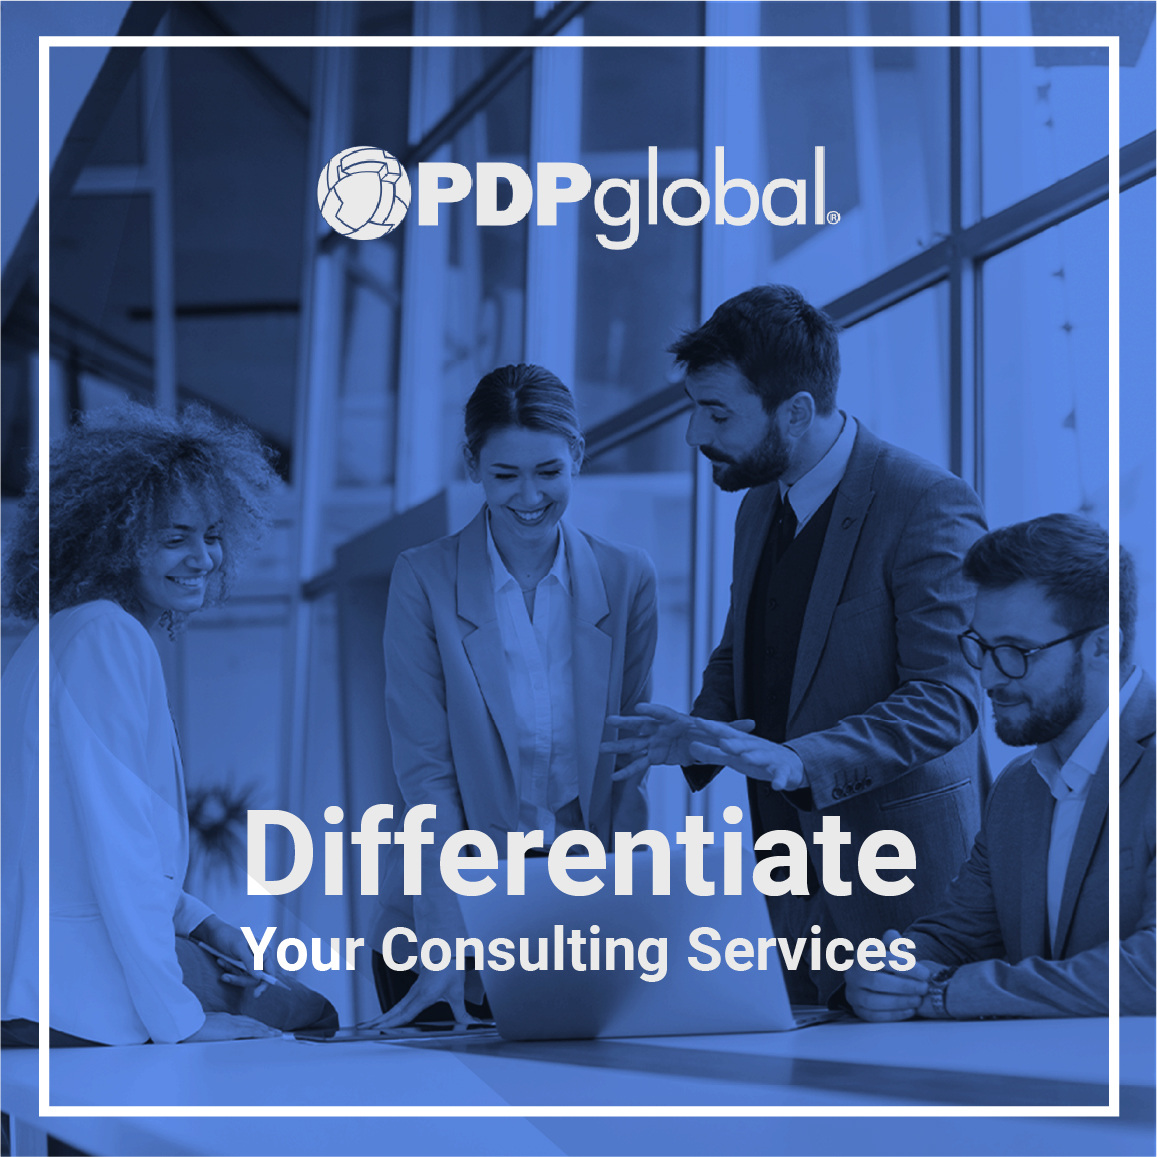 The PDP People Management System is a business consulting firm's innovative solution to deliver unprecedented value to clients.

Get certified, differentiate services, and witness your business skyrocket 📈
hubs.ly/Q02wRn200

#ExecutiveCoach #BusinessConsultant #Consulting